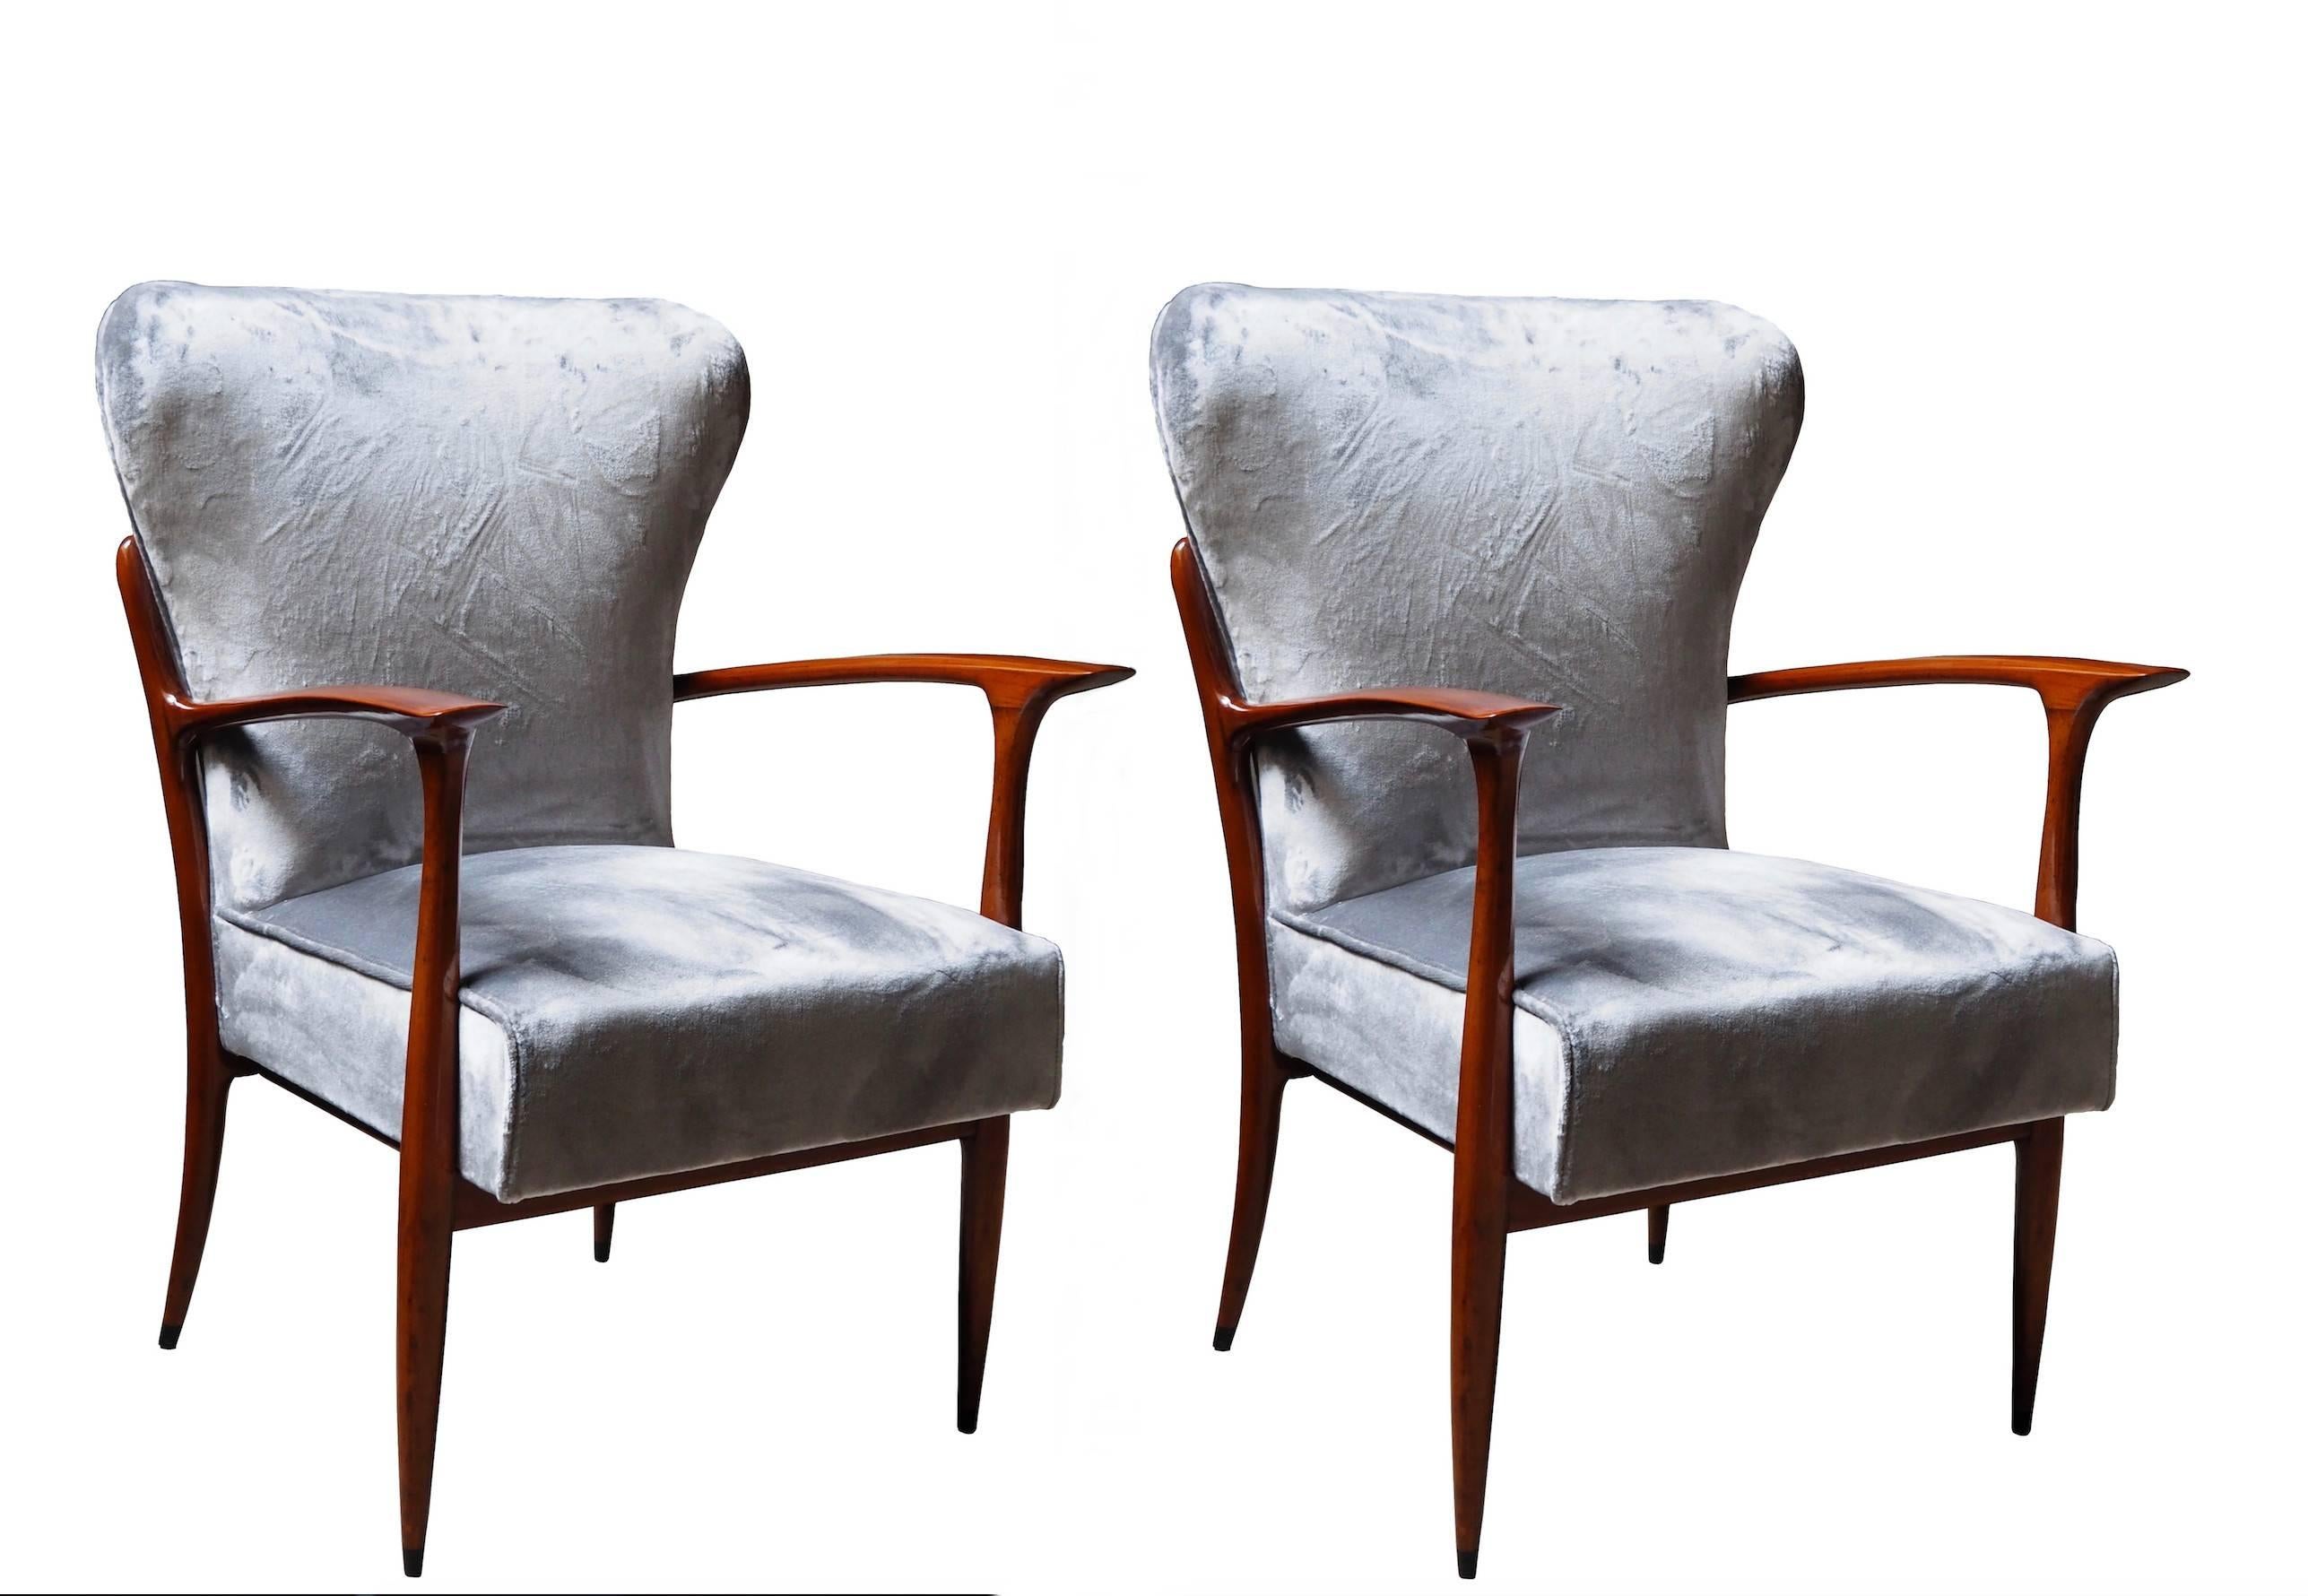 Pair of armchairs designed by Ico Parisi in the early 1950s.
Structure in cherry wood.
Seat and backrest are upholstered with grey velvet fabric.